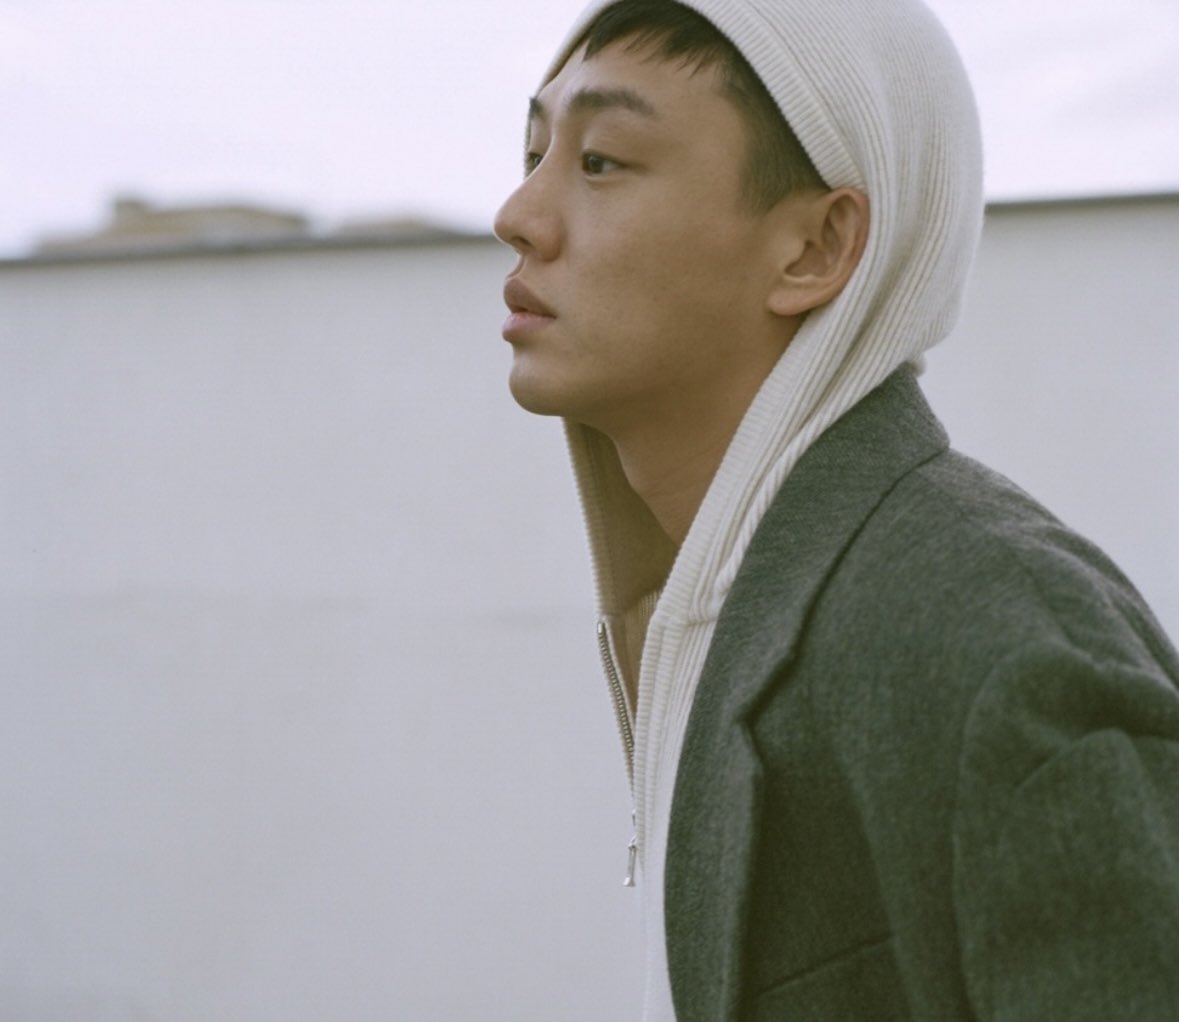 June. Once again, I hope that June will be gentle and smooth for us. May the sun shine and everything be fine🙏💚
good morning @seeksik 

#YooAhIn #유아인 #ユアイン